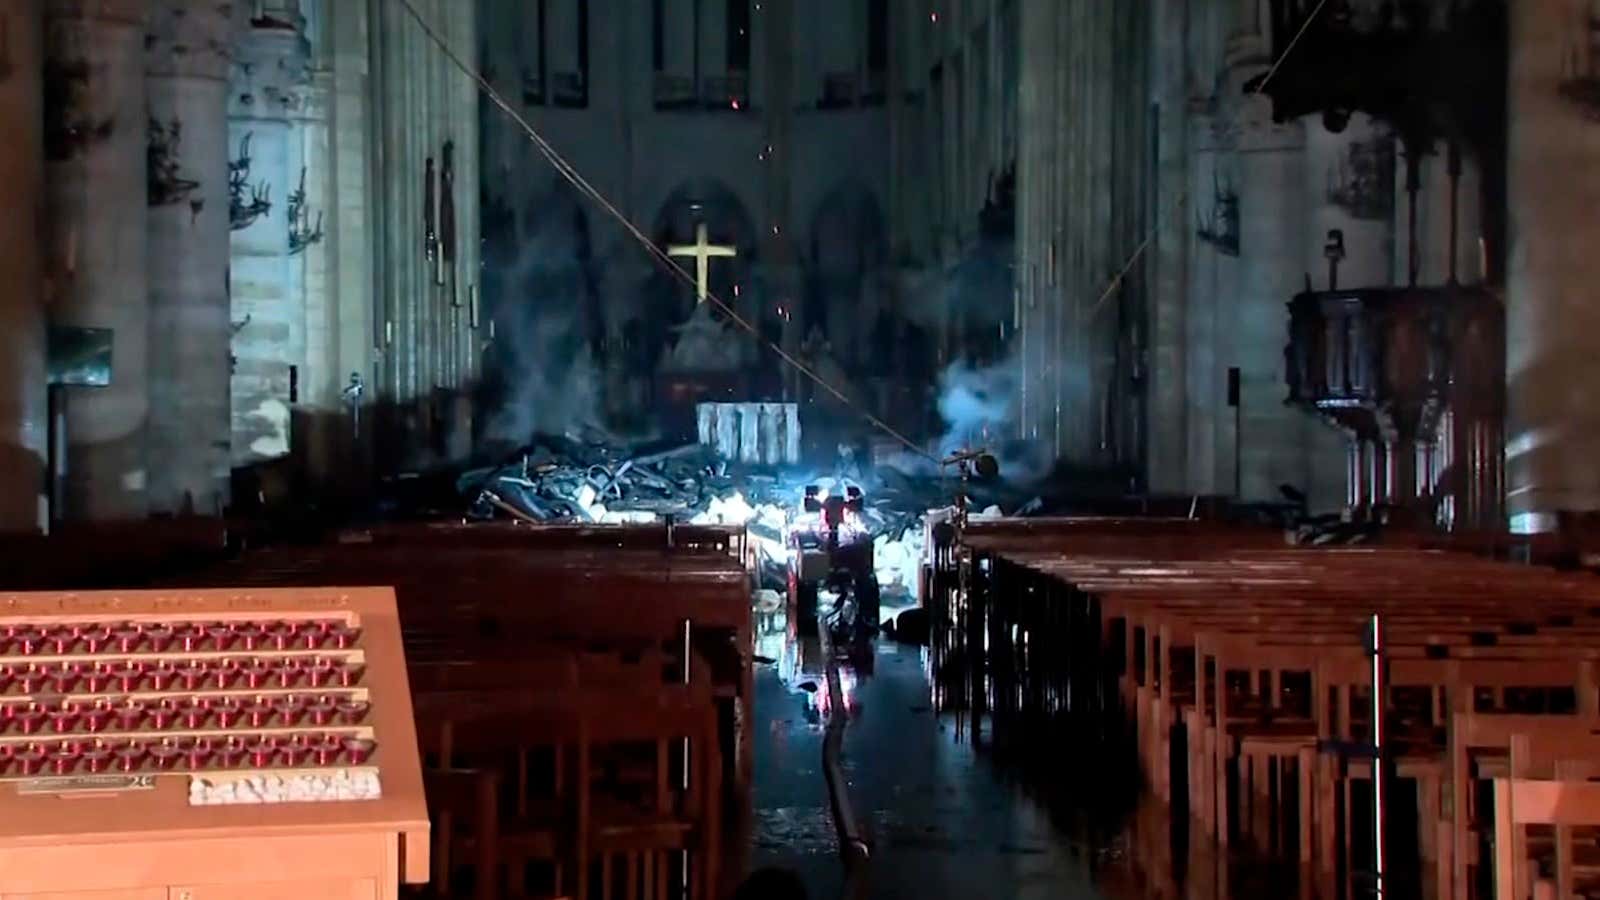 An image taken from France Televisions video shows the fire damage inside the Notre Dame cathedral on April 15.